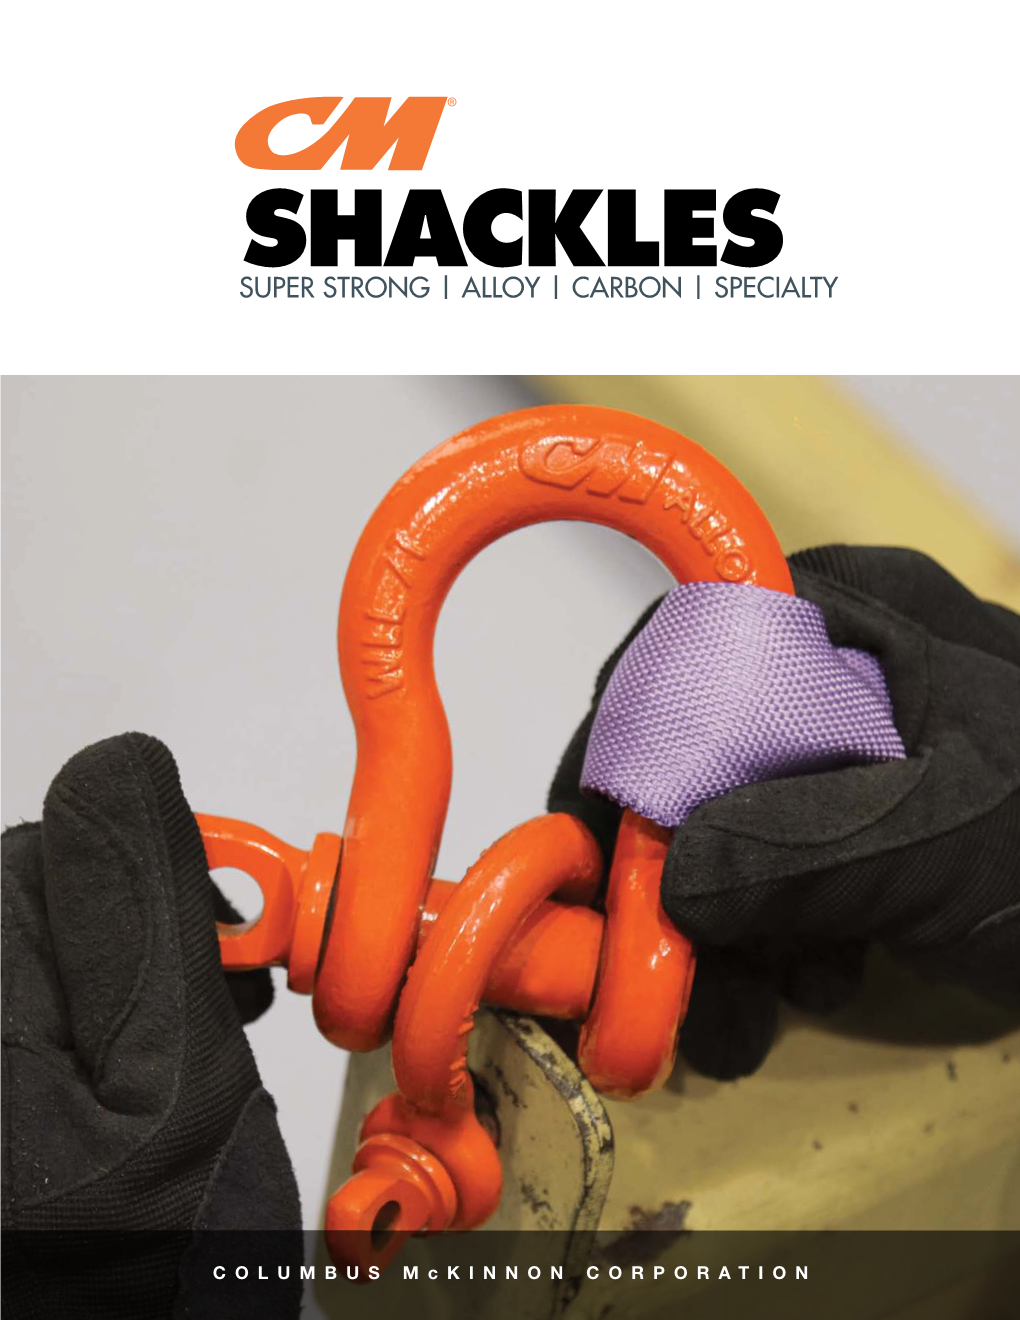 Shackles Super Strong | Alloy | Carbon | Specialty